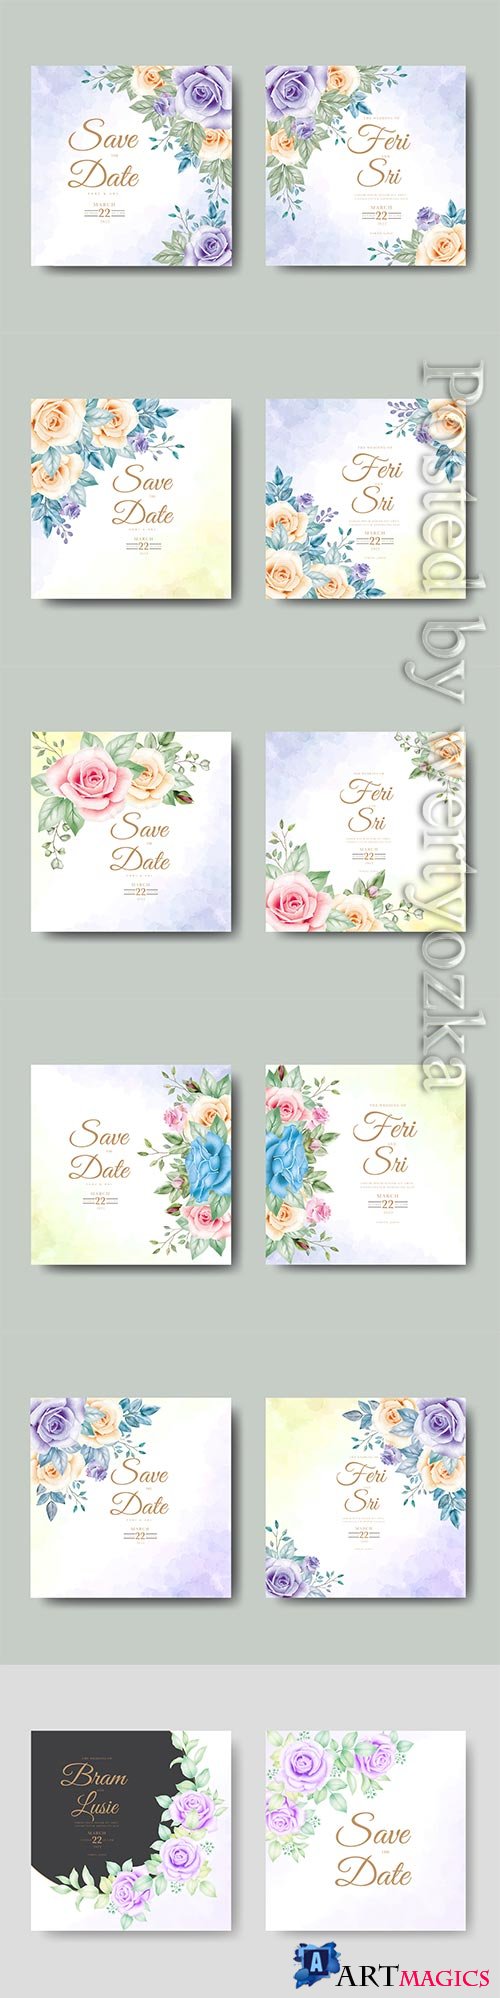 Beautiful vector wedding invitation card with floral watercolor